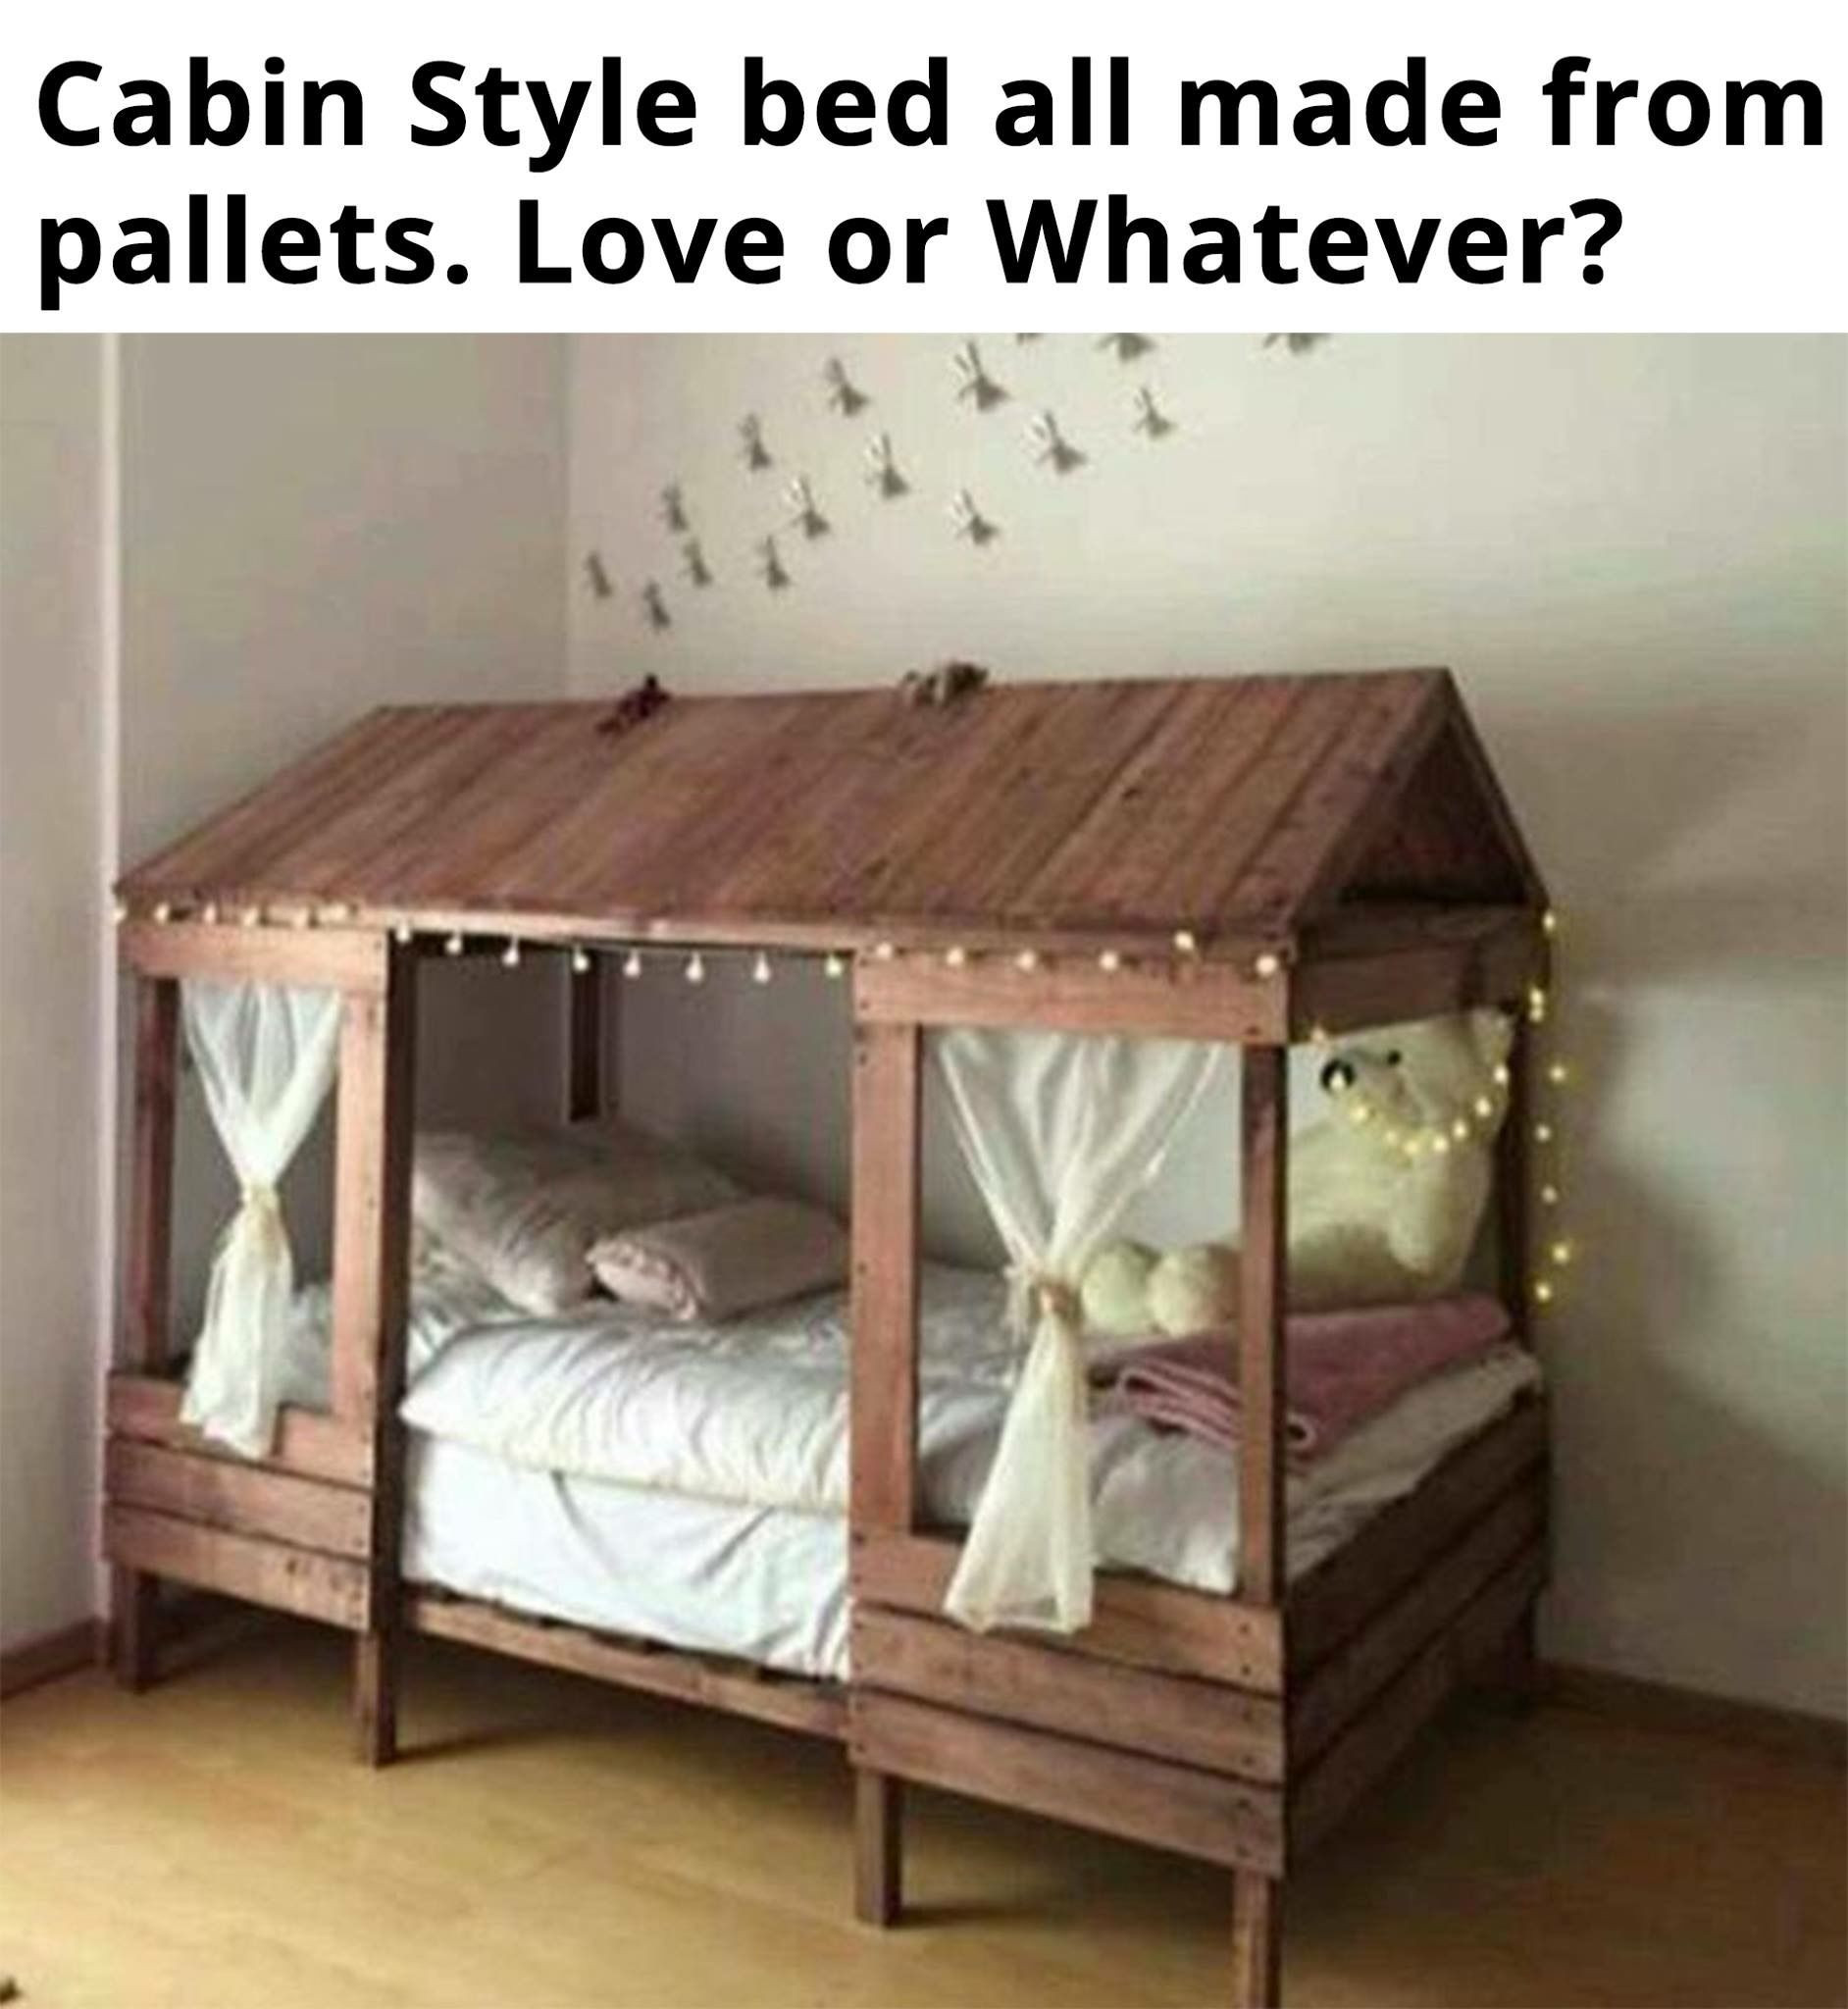 DIY Toddler Beds
 Love this idea for a toddler bed Looks simple enough to